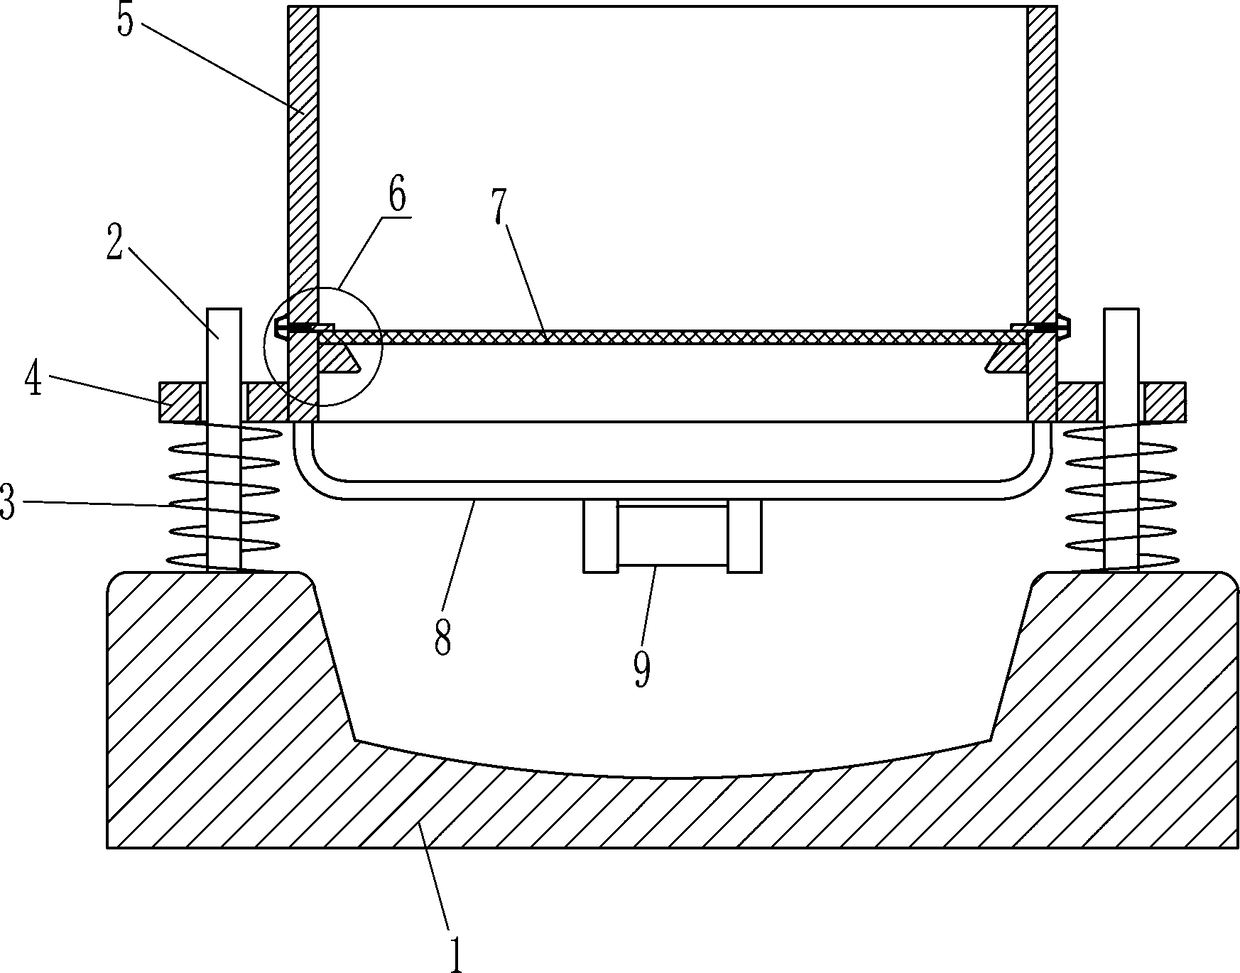 Seed screening device convenient for replacing screen mesh